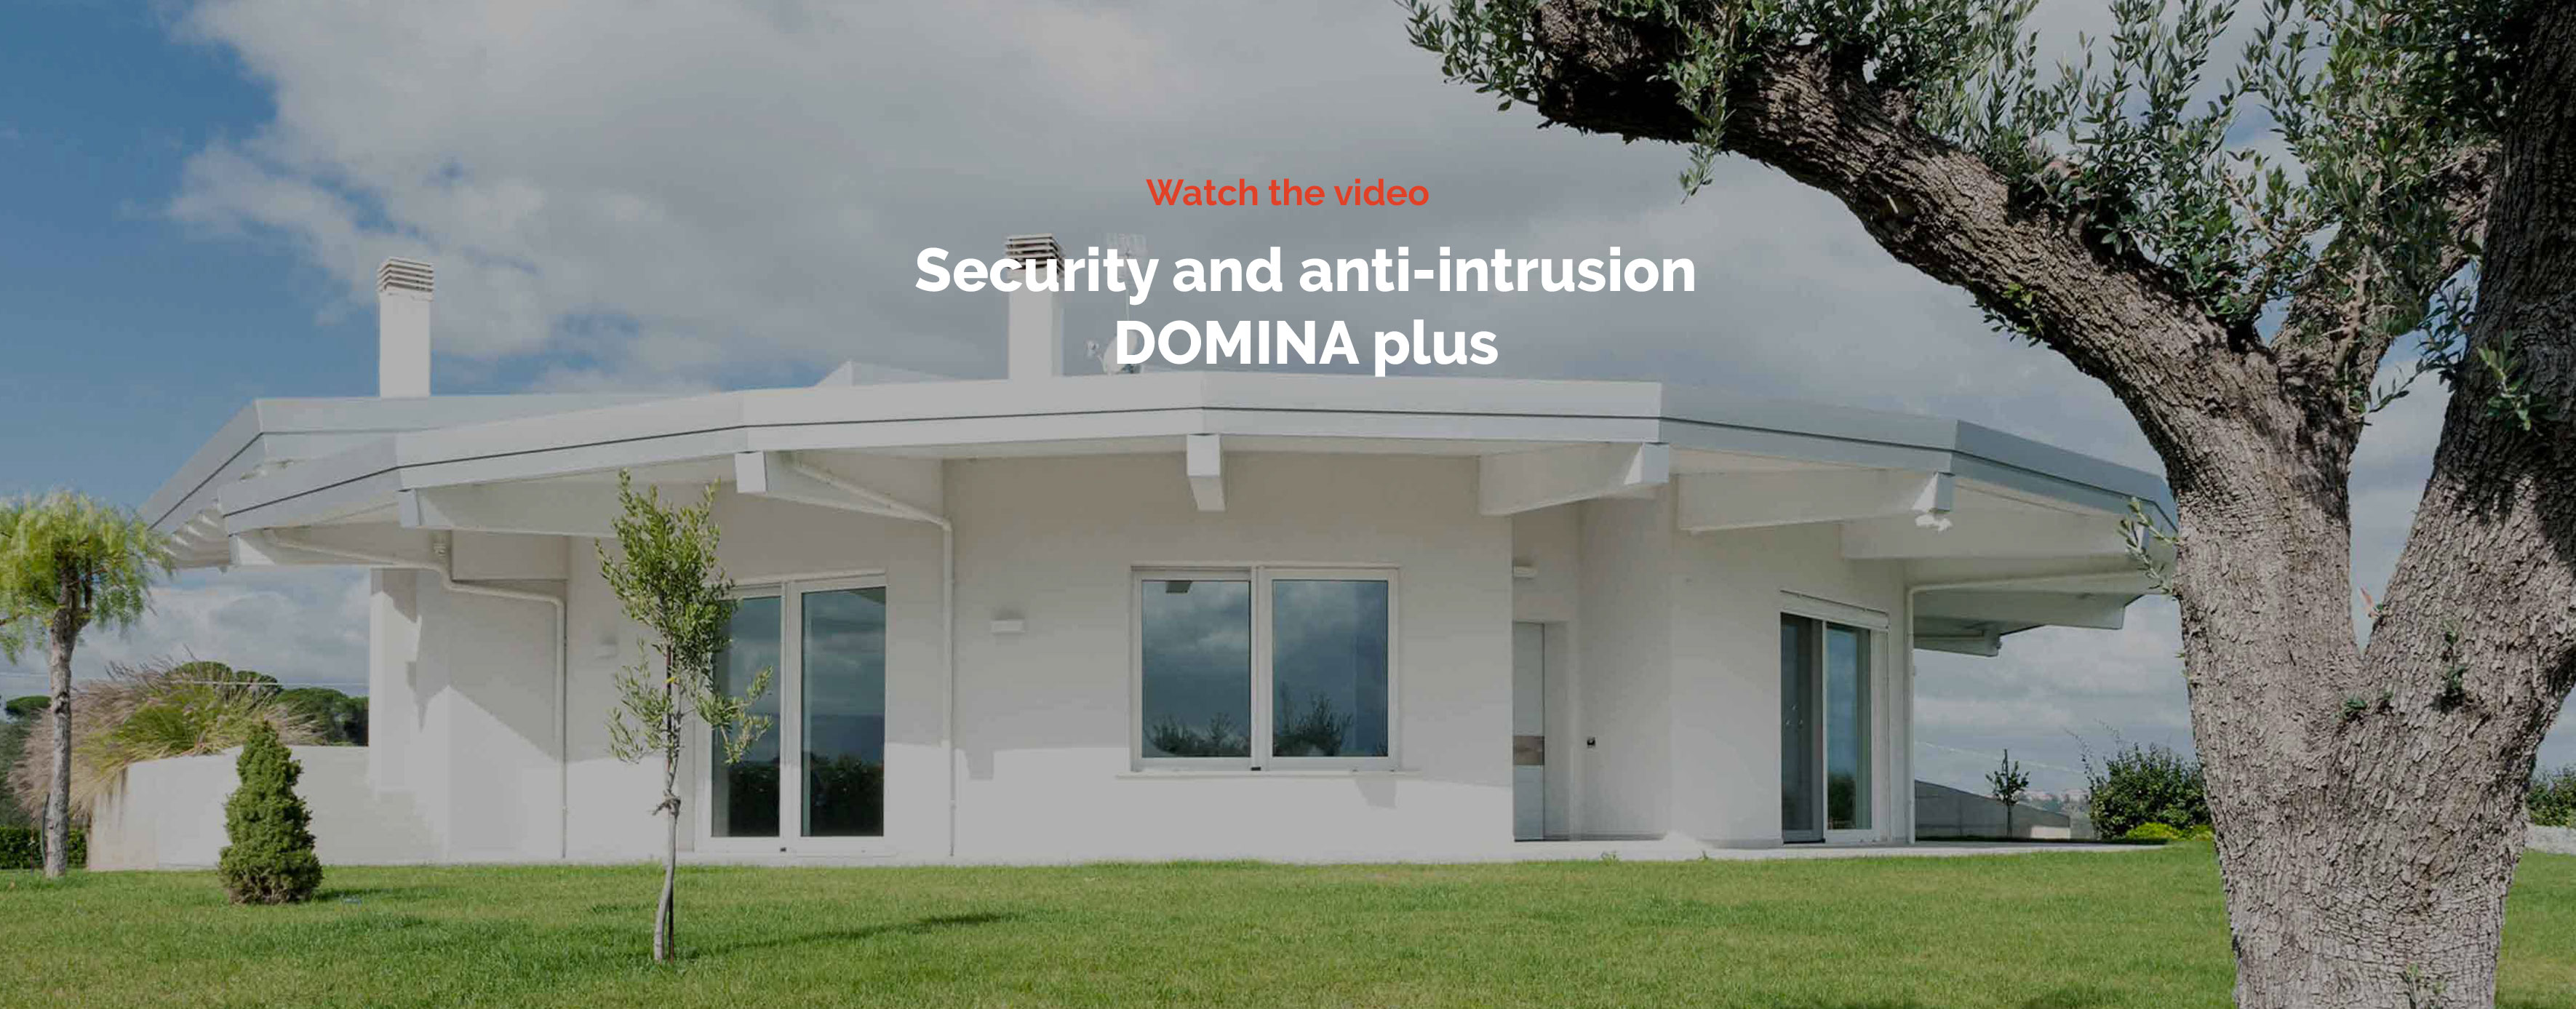 Home automation AVE DOMINA plus – Security and anti-intrusion video